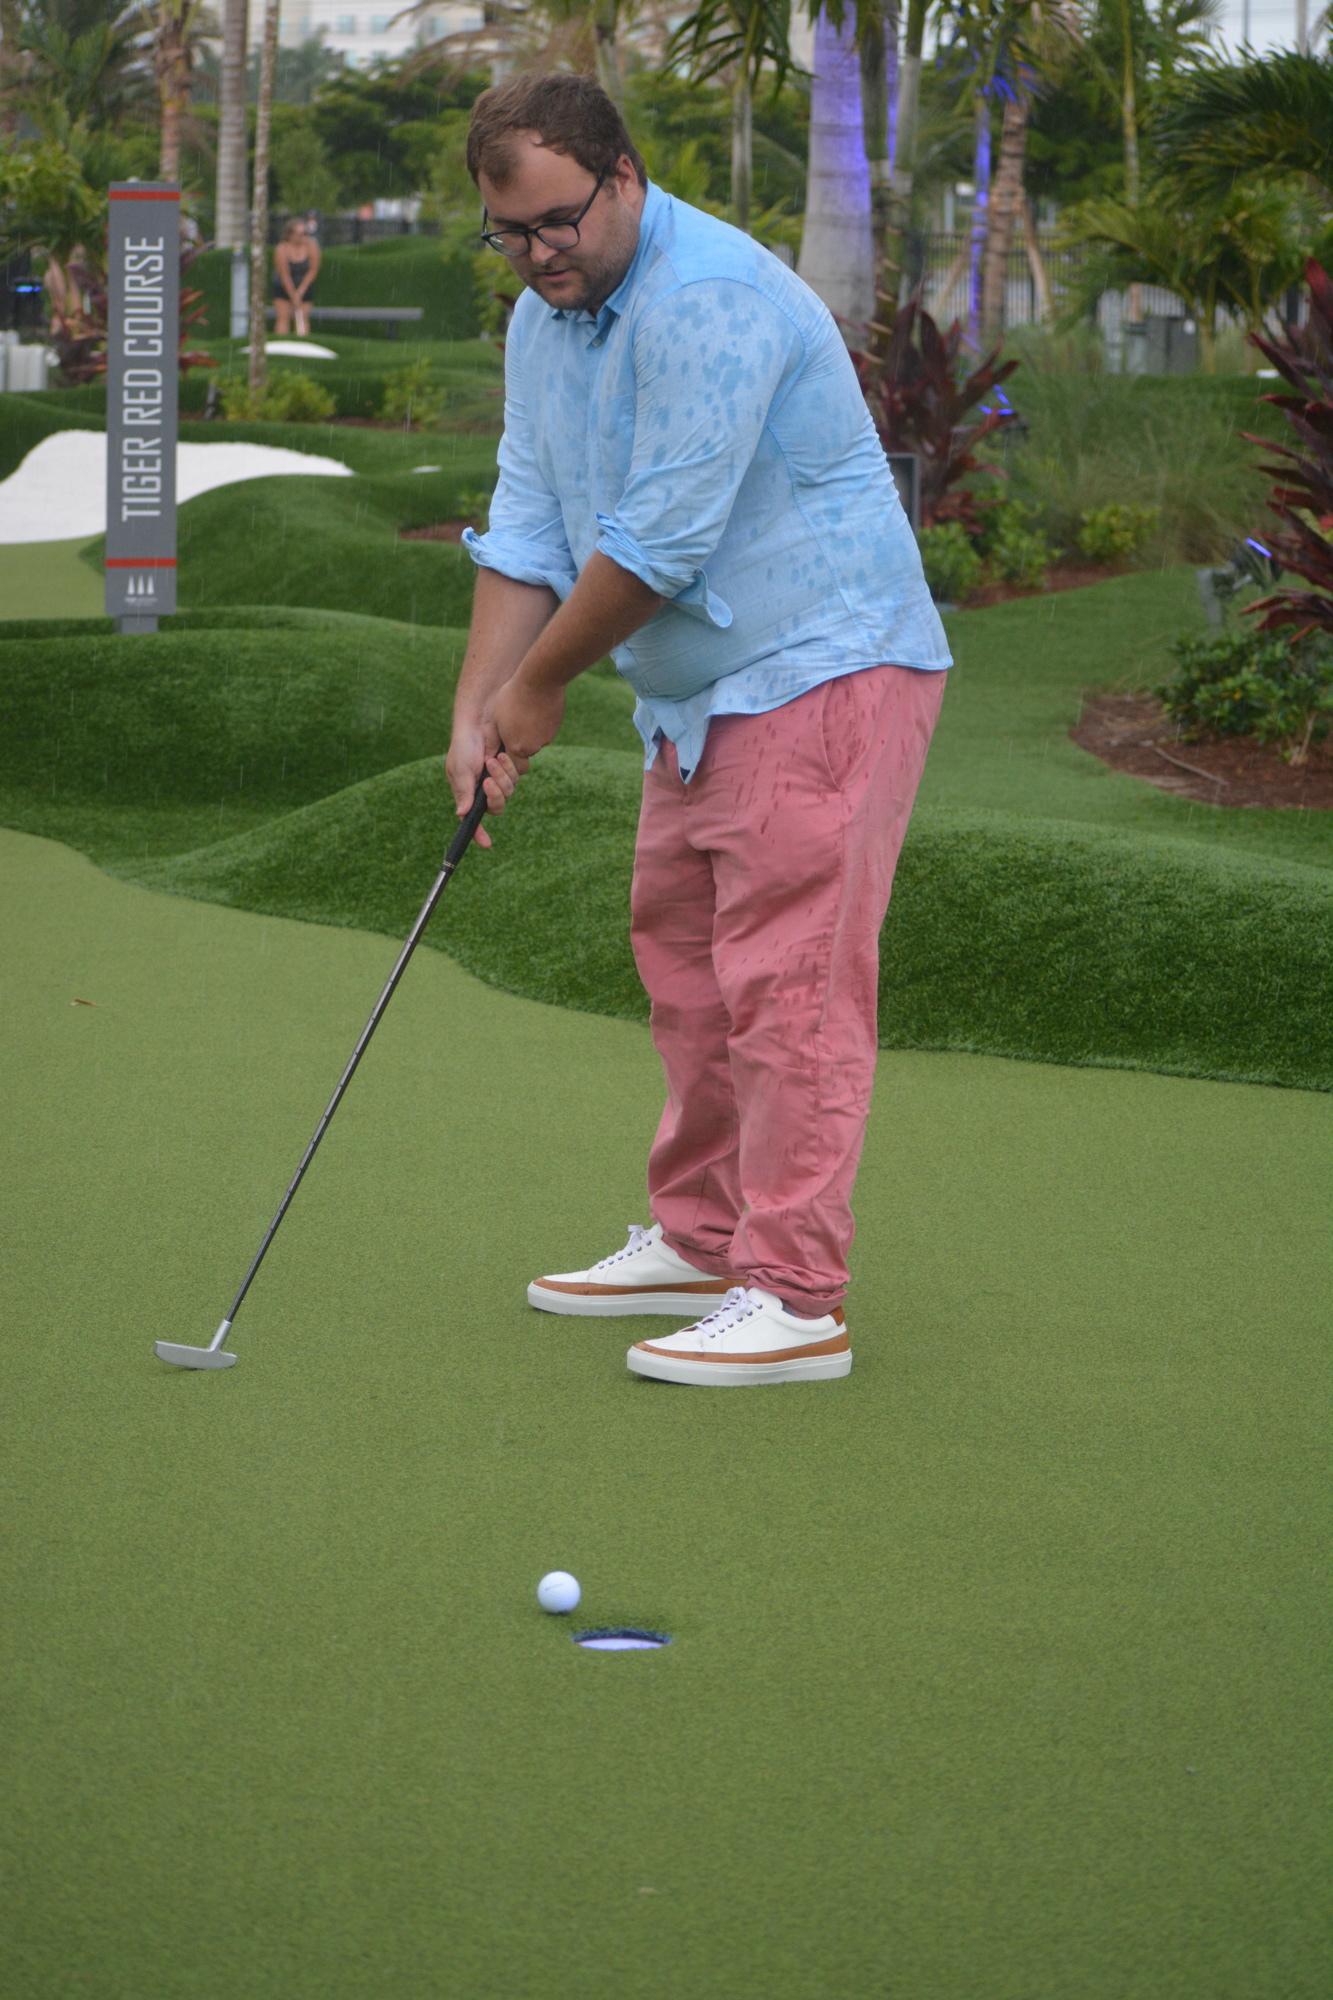 Ryan Kohn watches his putt at PopStroke. The putting and dining experience co-owned by Tiger Woods' TGR Ventures opened at The Mall at UTC in April.